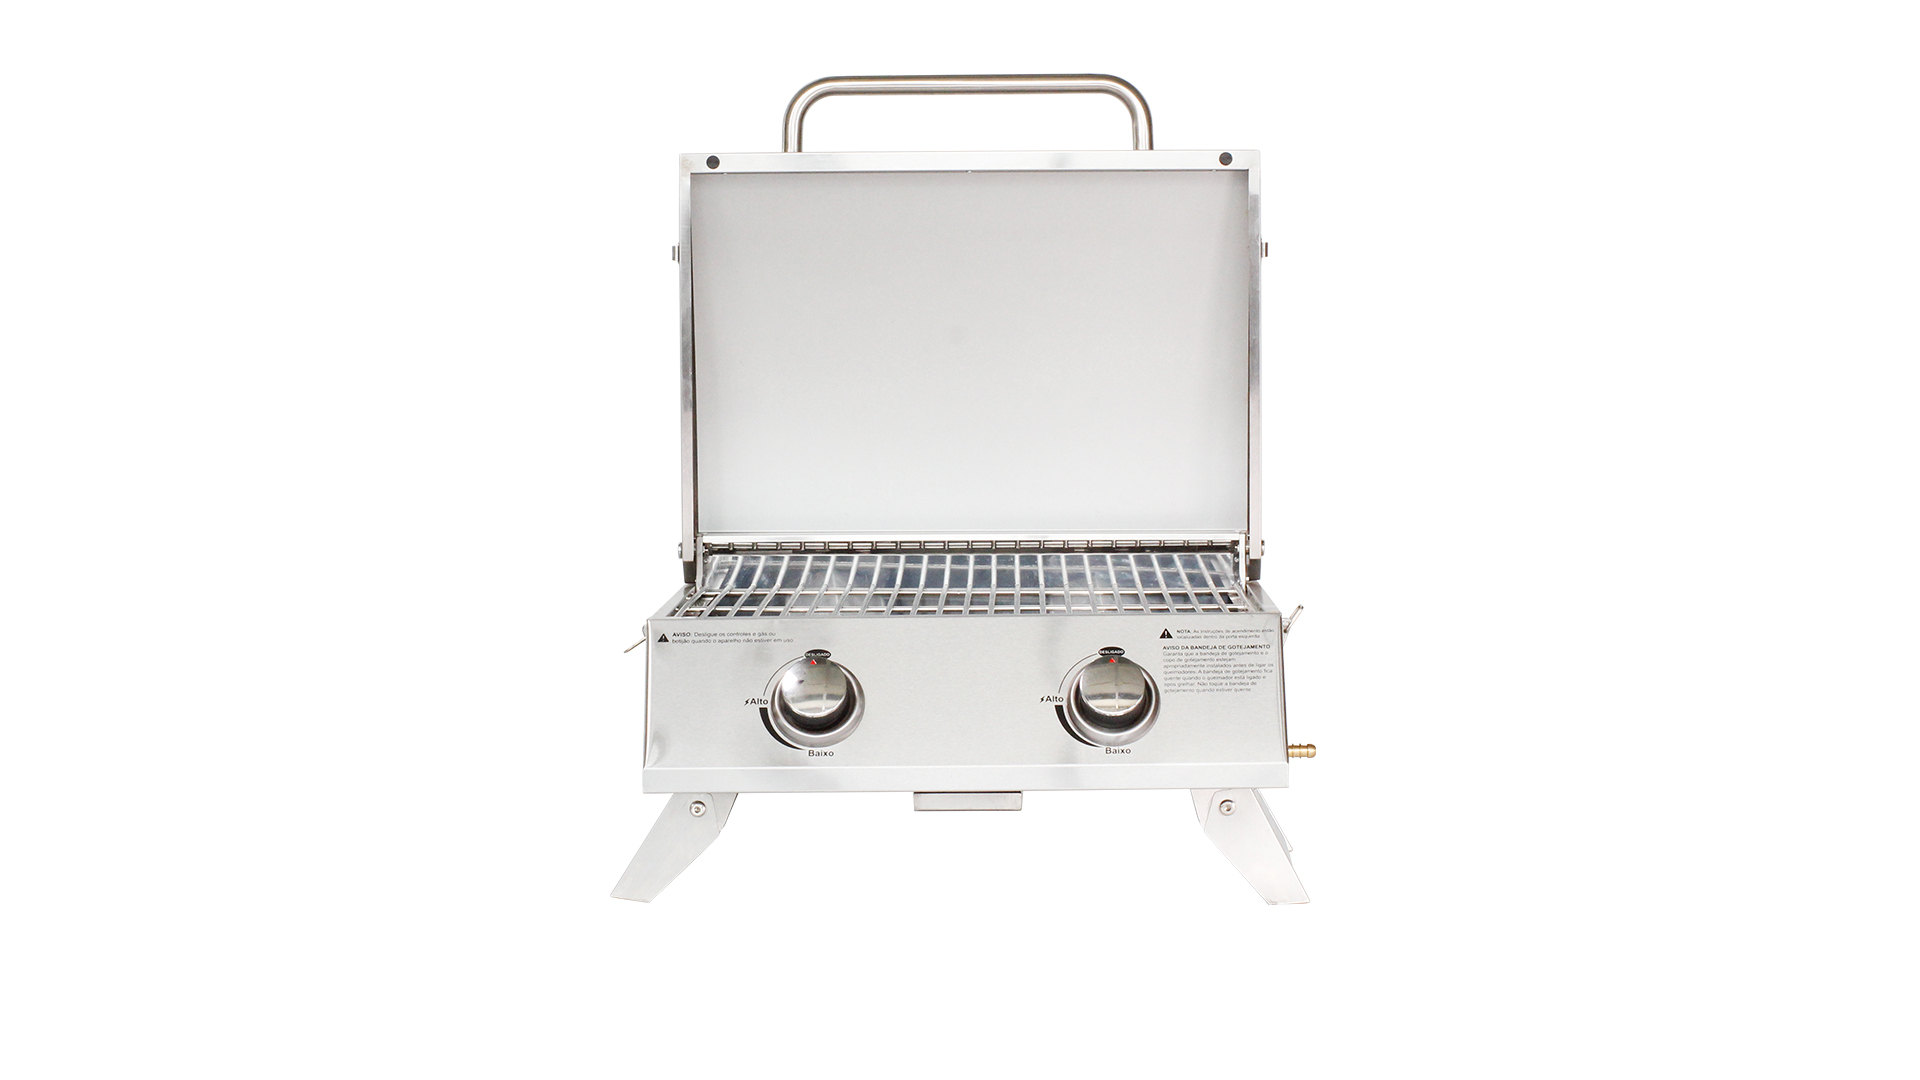 Professional WST-021 Charcoal Oven manufacturers